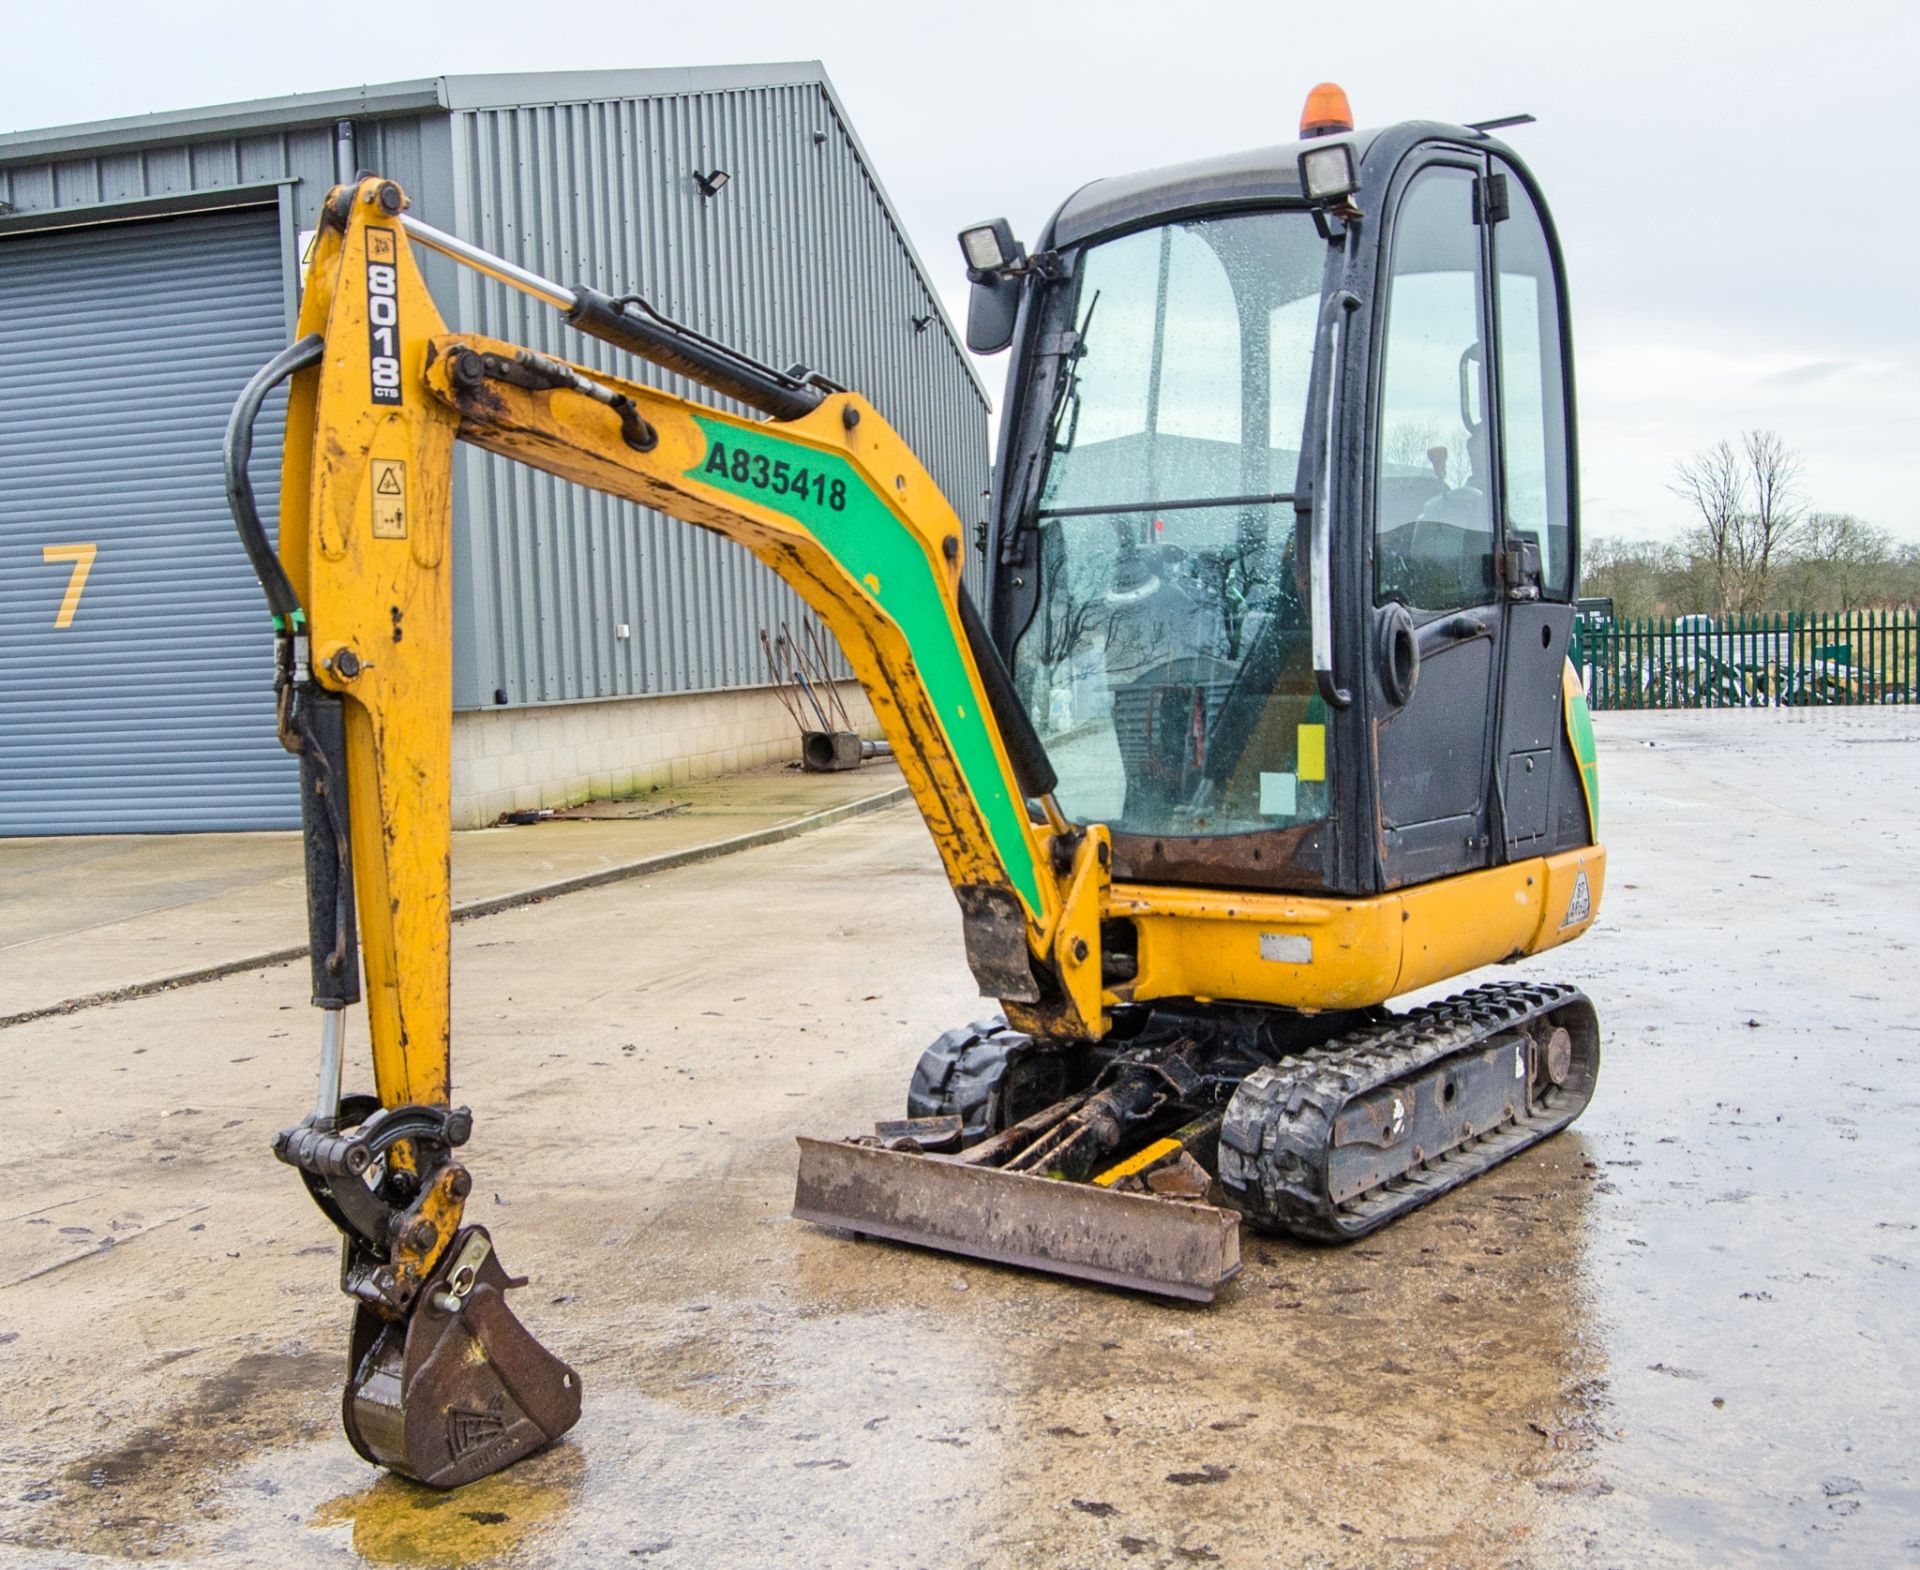 JCB 8018 CTS 1.5 tonne rubber tracked mini excavator Year: 2017 S/N: 2593504 Recorded Hours: 1467